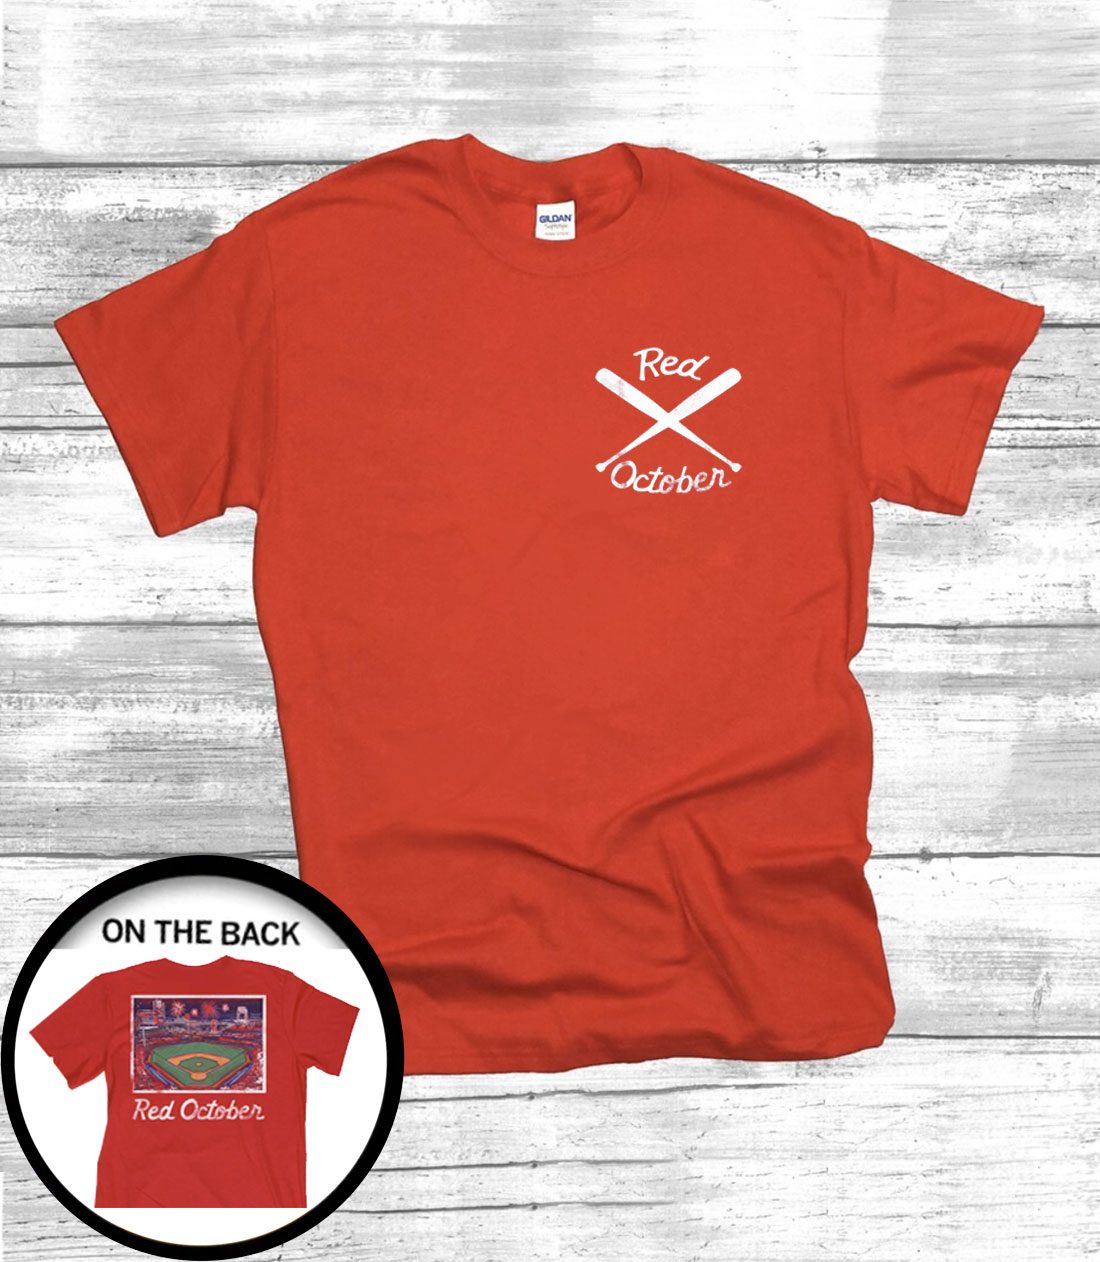 Phillies Red October T-Shirts Now Available